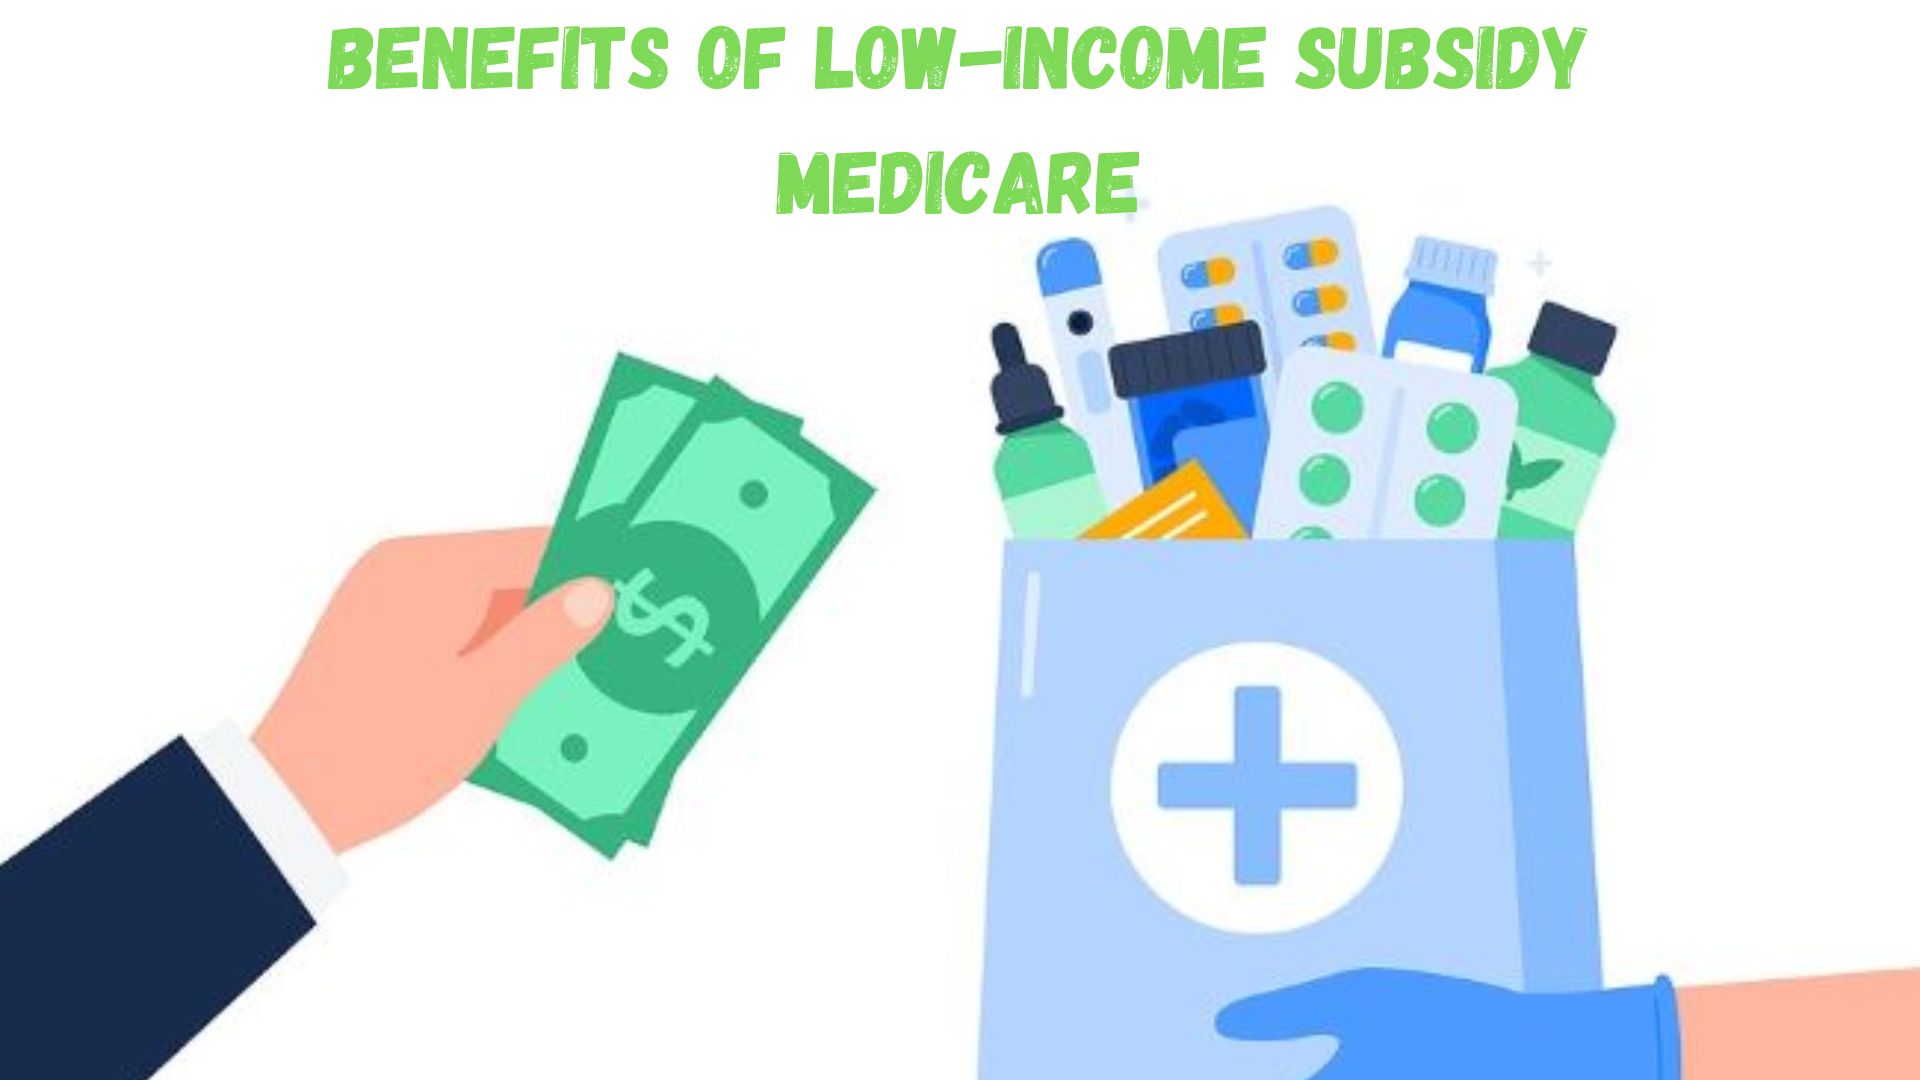 The Benefits of Low Income Subsidy Medicare